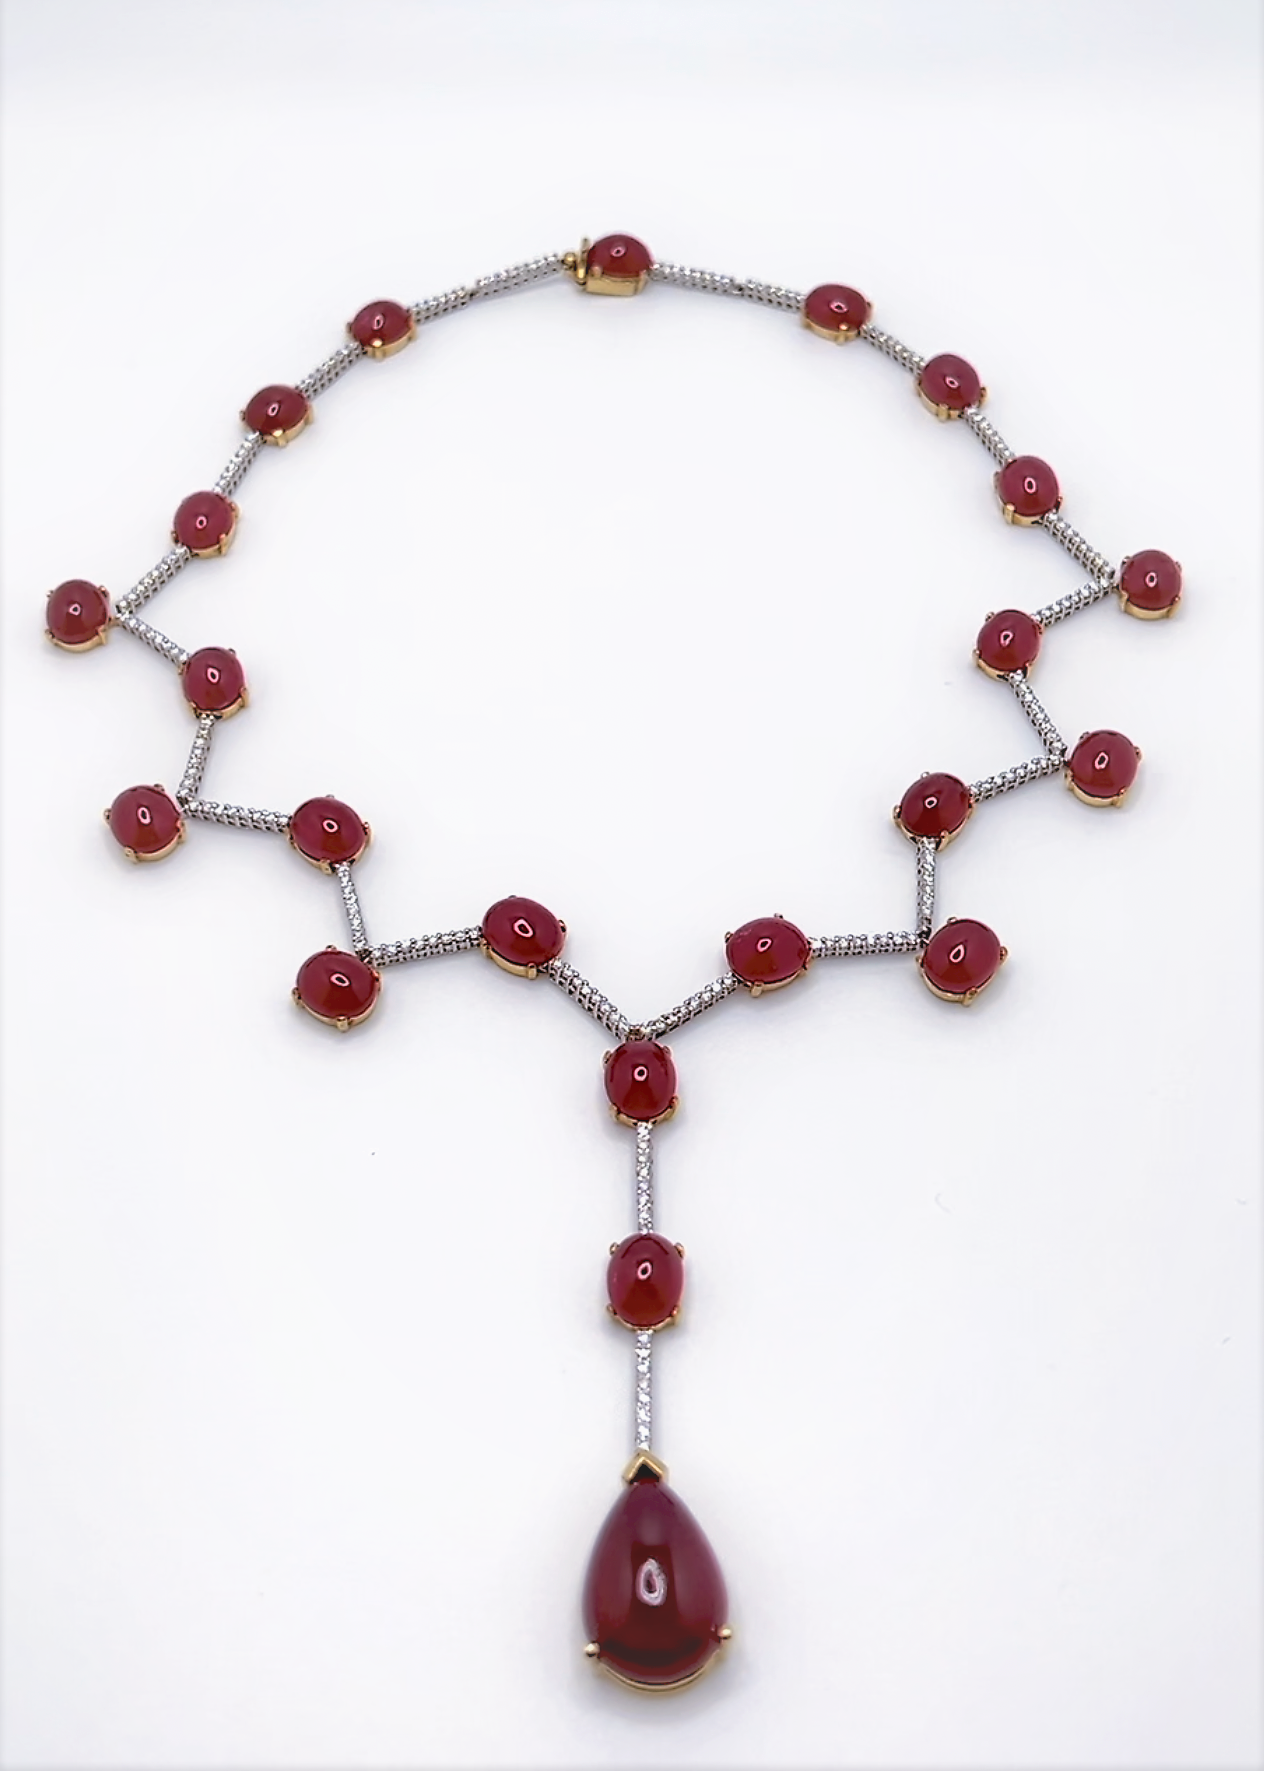 Exotic cabochon Ruby necklace